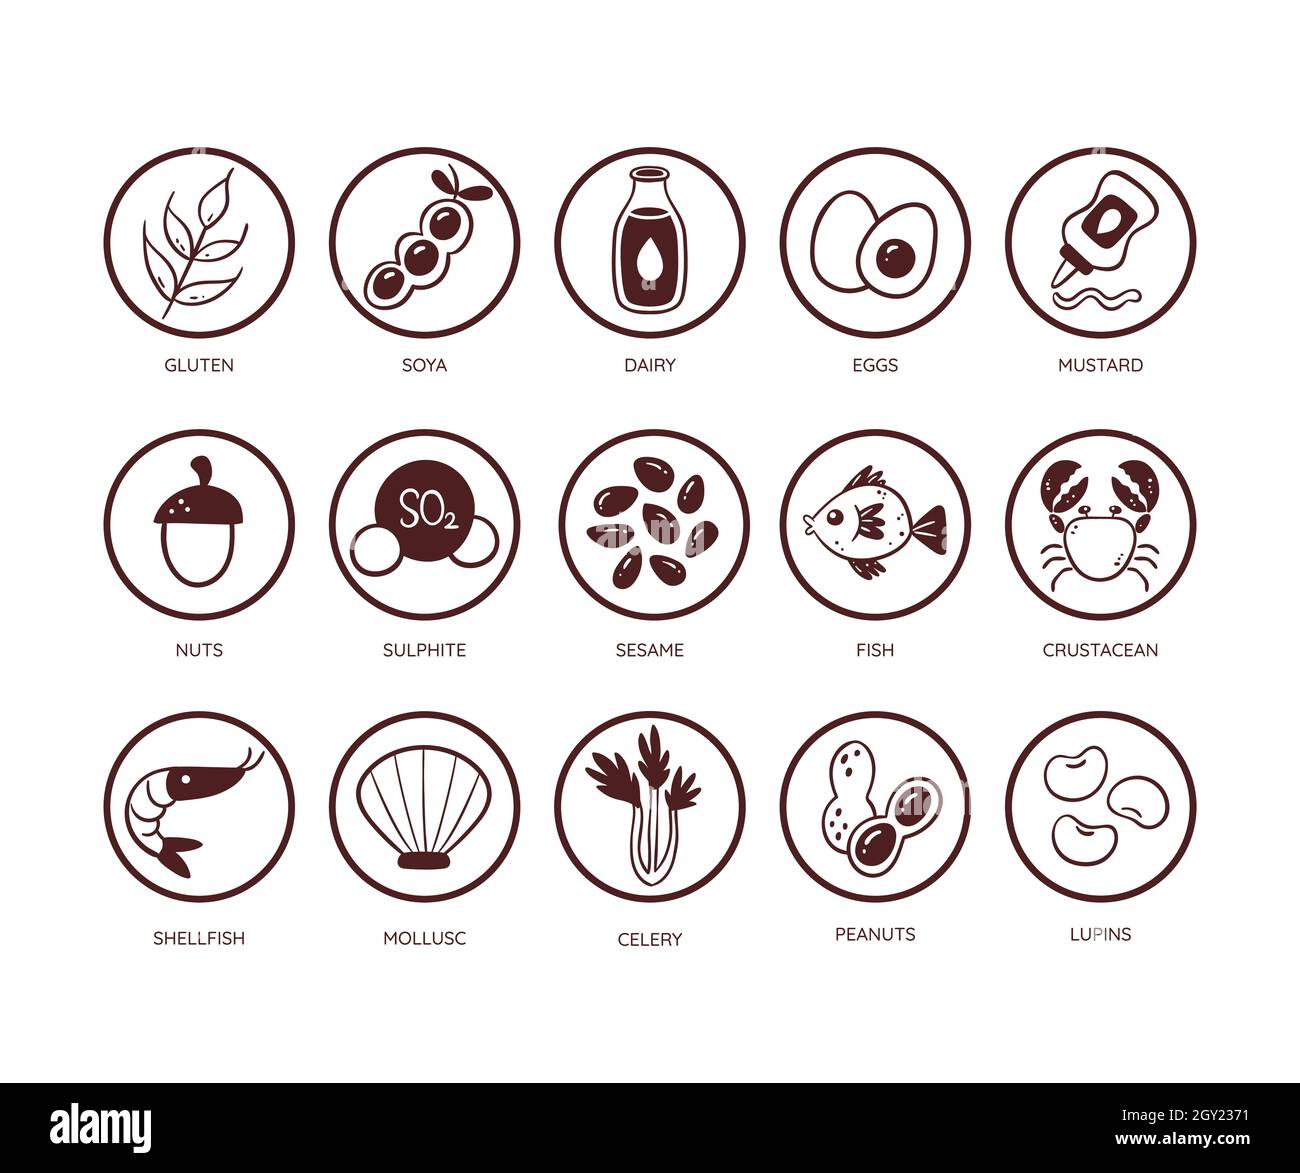 Food allergen icon set. Icons of the main ingredients that must be declared as allergens. Very useful for restaurant menus and meals. Monochromatic ve Stock Vector